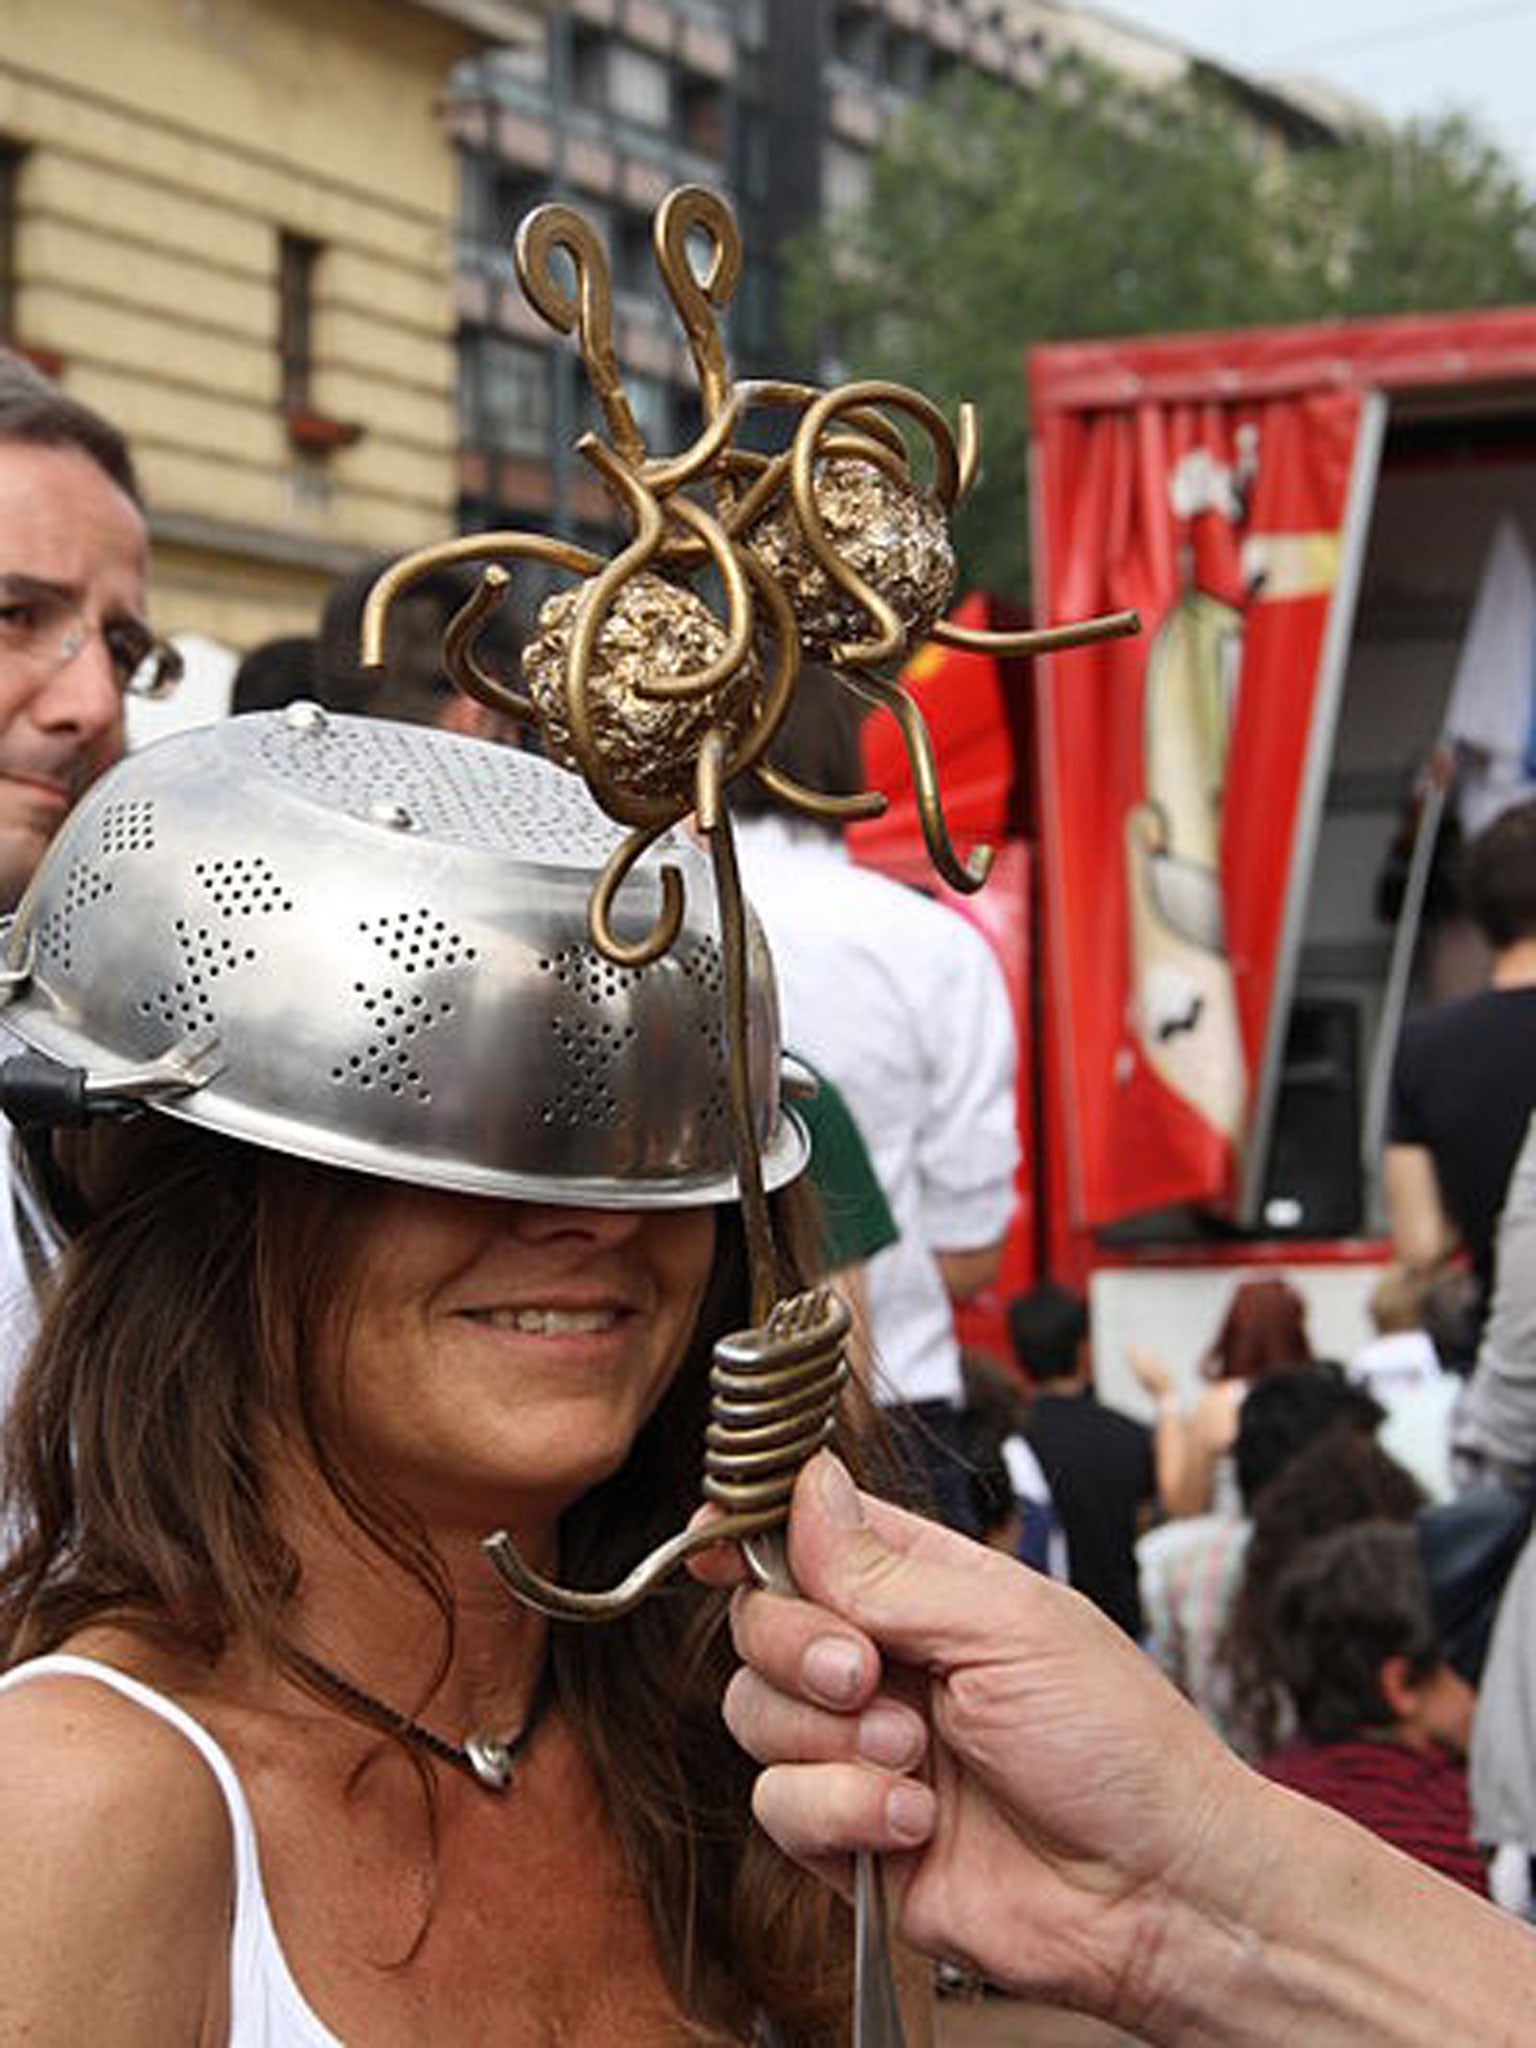 Pastafarians wear colanders on their head as a symbol of their religious beliefs